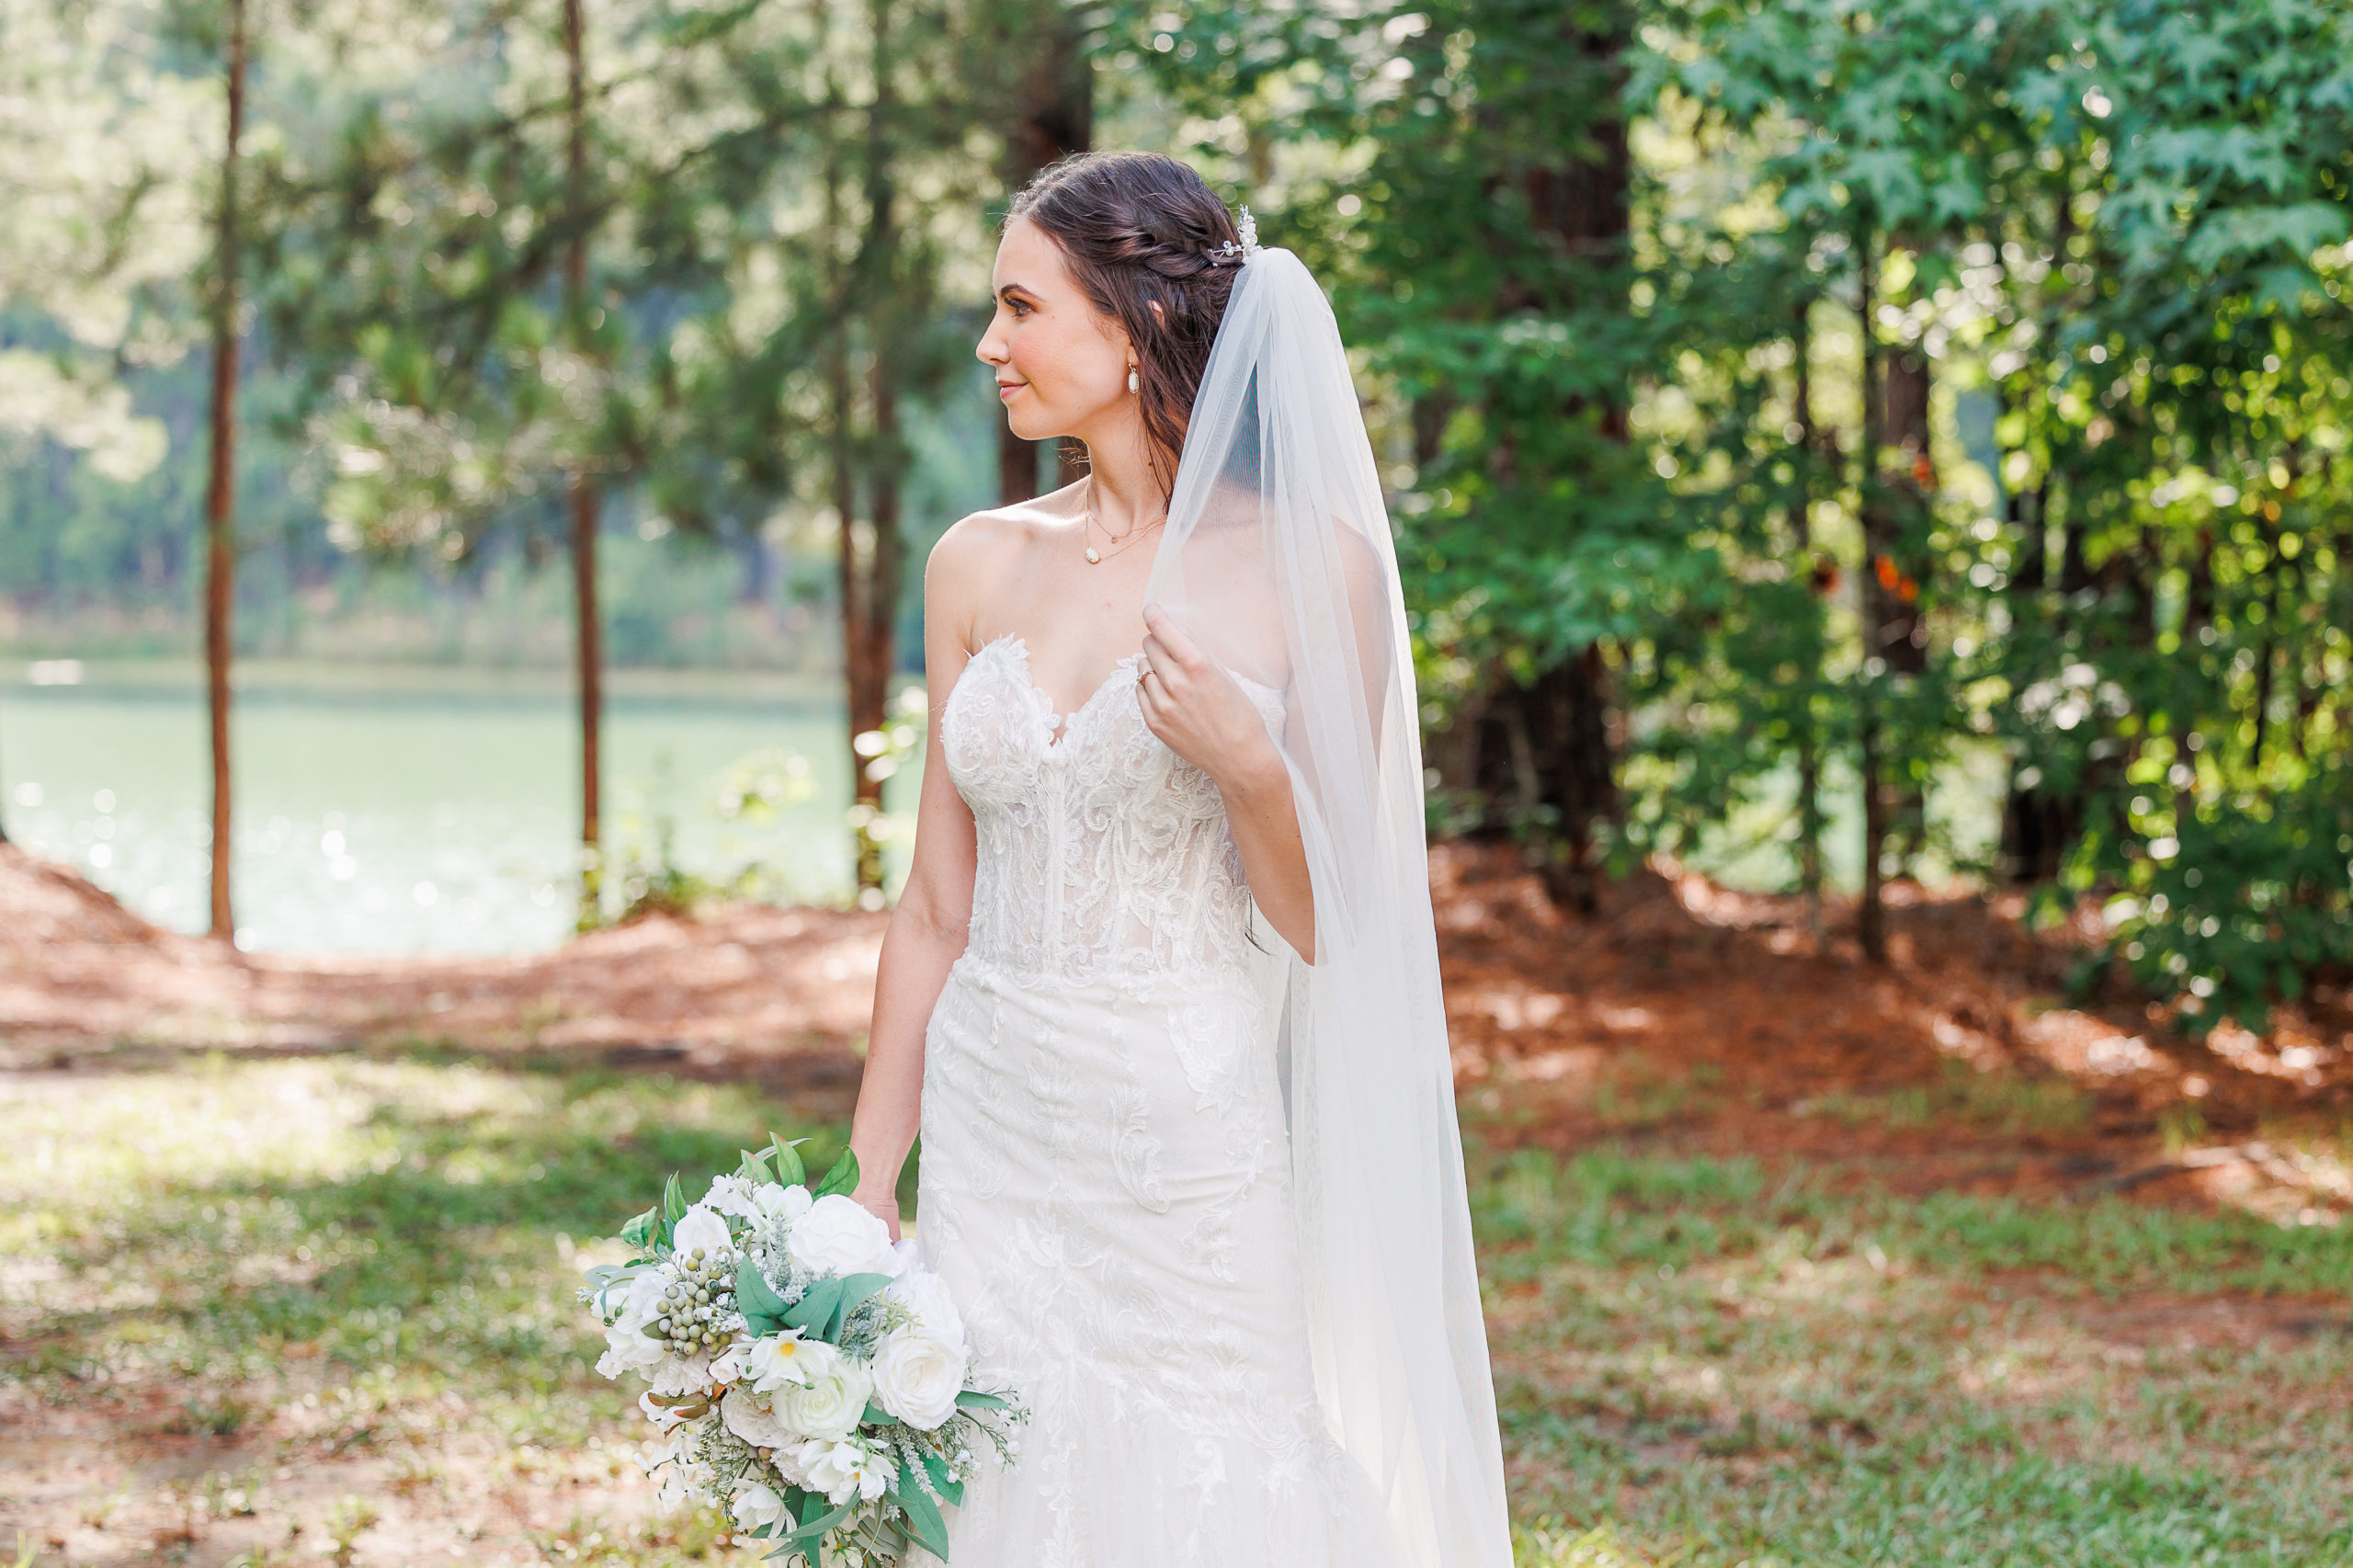 Bridal portrait planning how much wedding photography coverage do you really need?